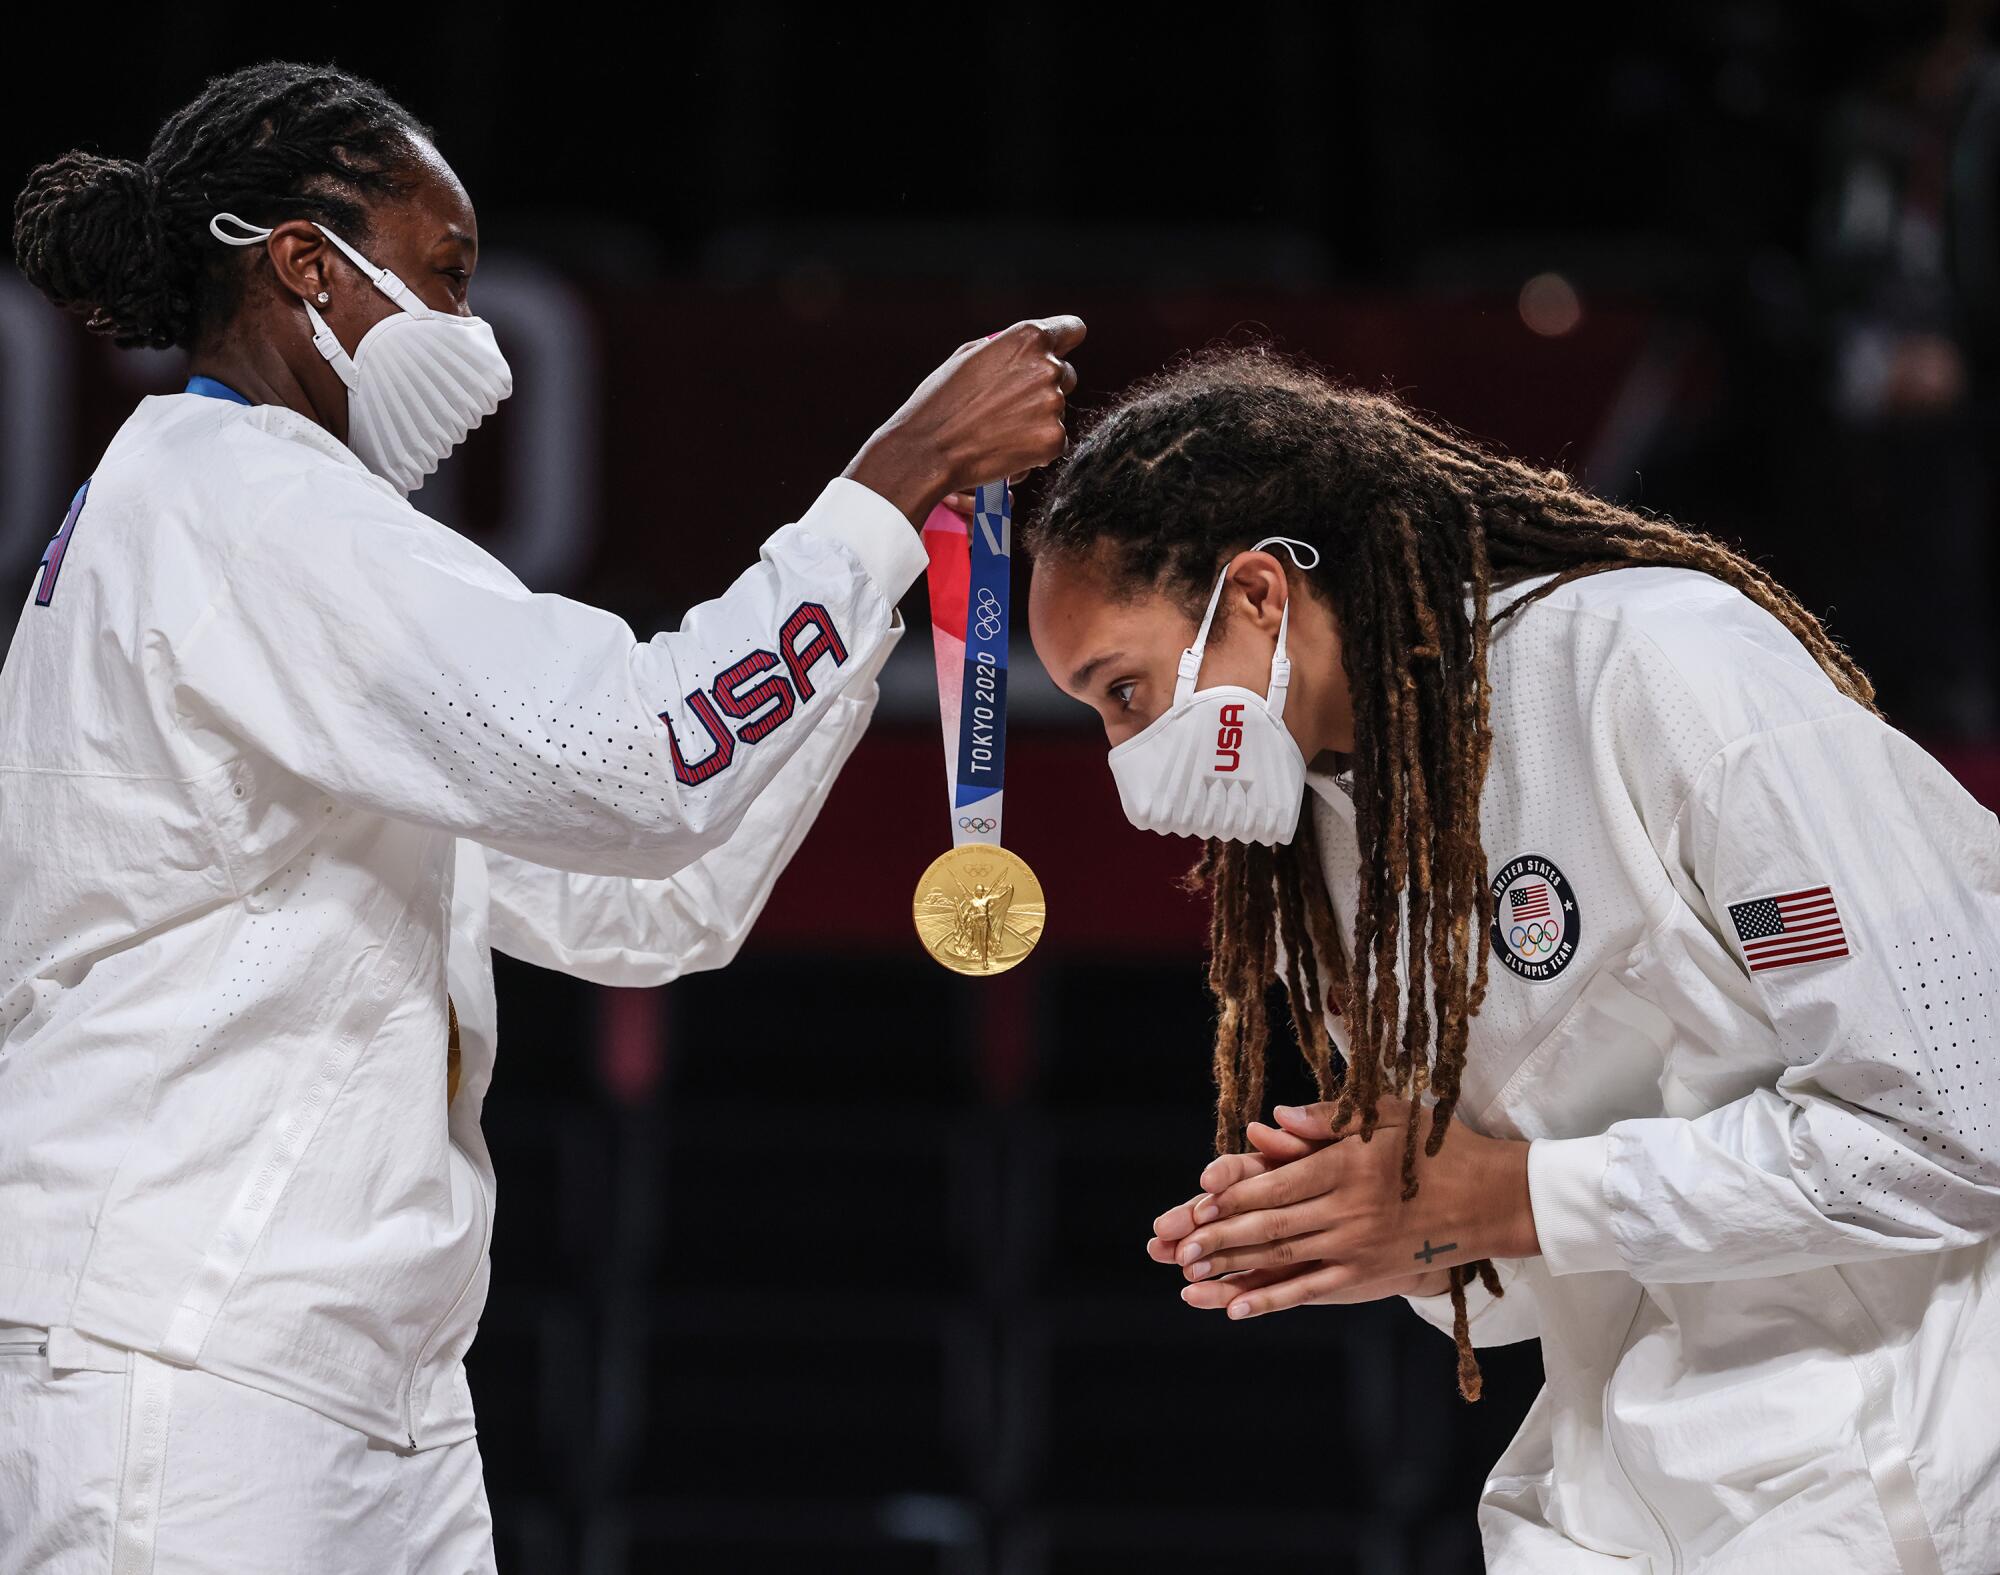 USA's Tina Charles  gives a gold medal to Brittney Griner.